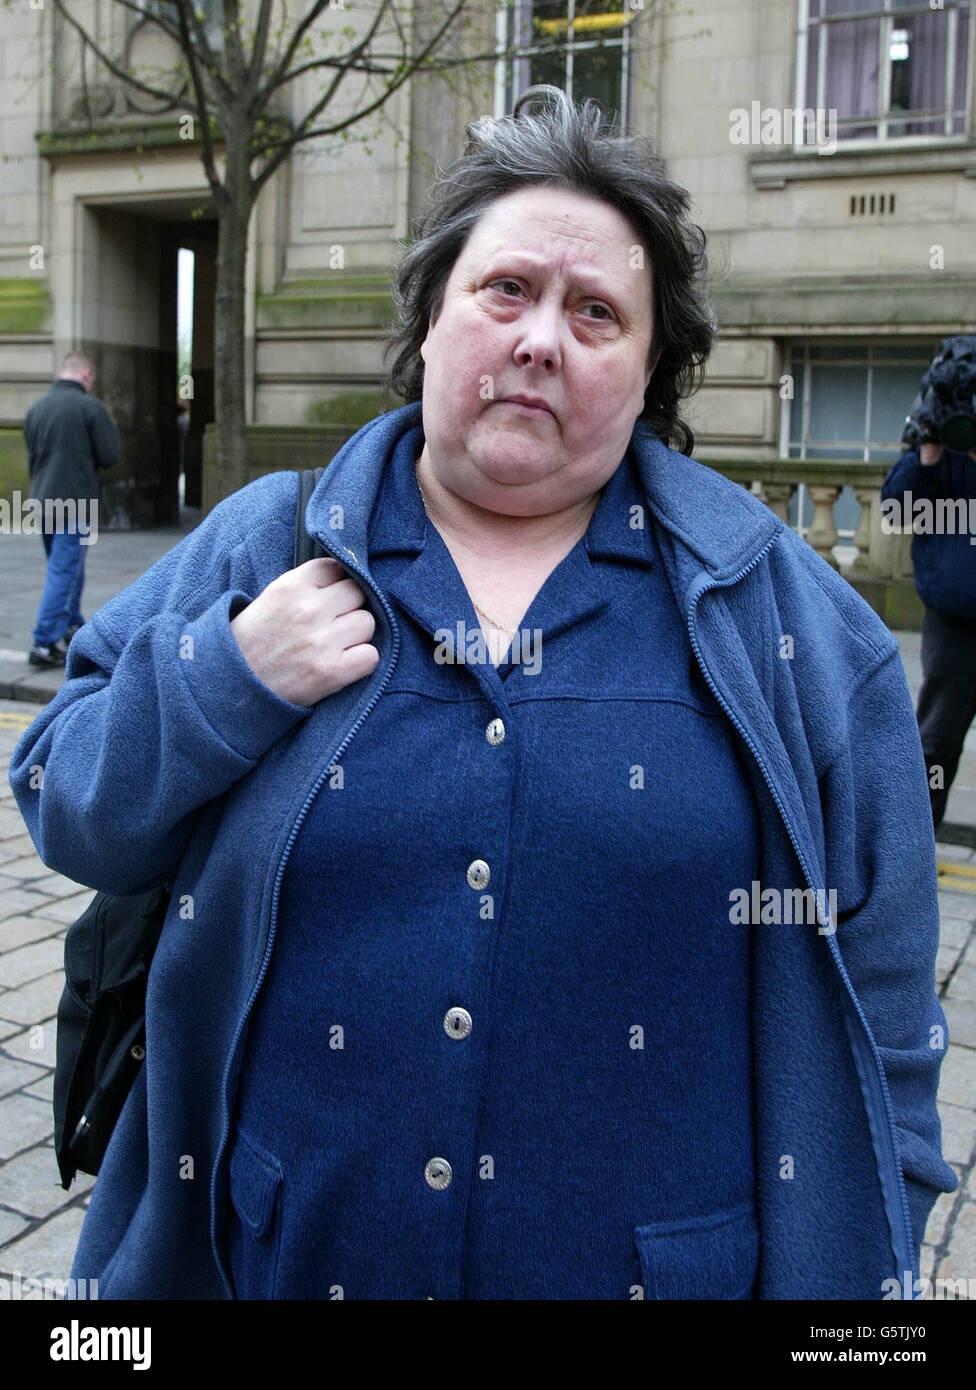 Joyce Jones, 52, leaves Bolton Magistrates after pleading guilty to a charge of animal cruelty, after a dog was found mistreated at her home in Westhoughton, Bolton. RSPCA officials rescued a filthy and neglected dog following an anonymous call. *...The mother of three has escaped jail sentencing, with the case now adjourned until May 17 for the preparation of reports. Stock Photo